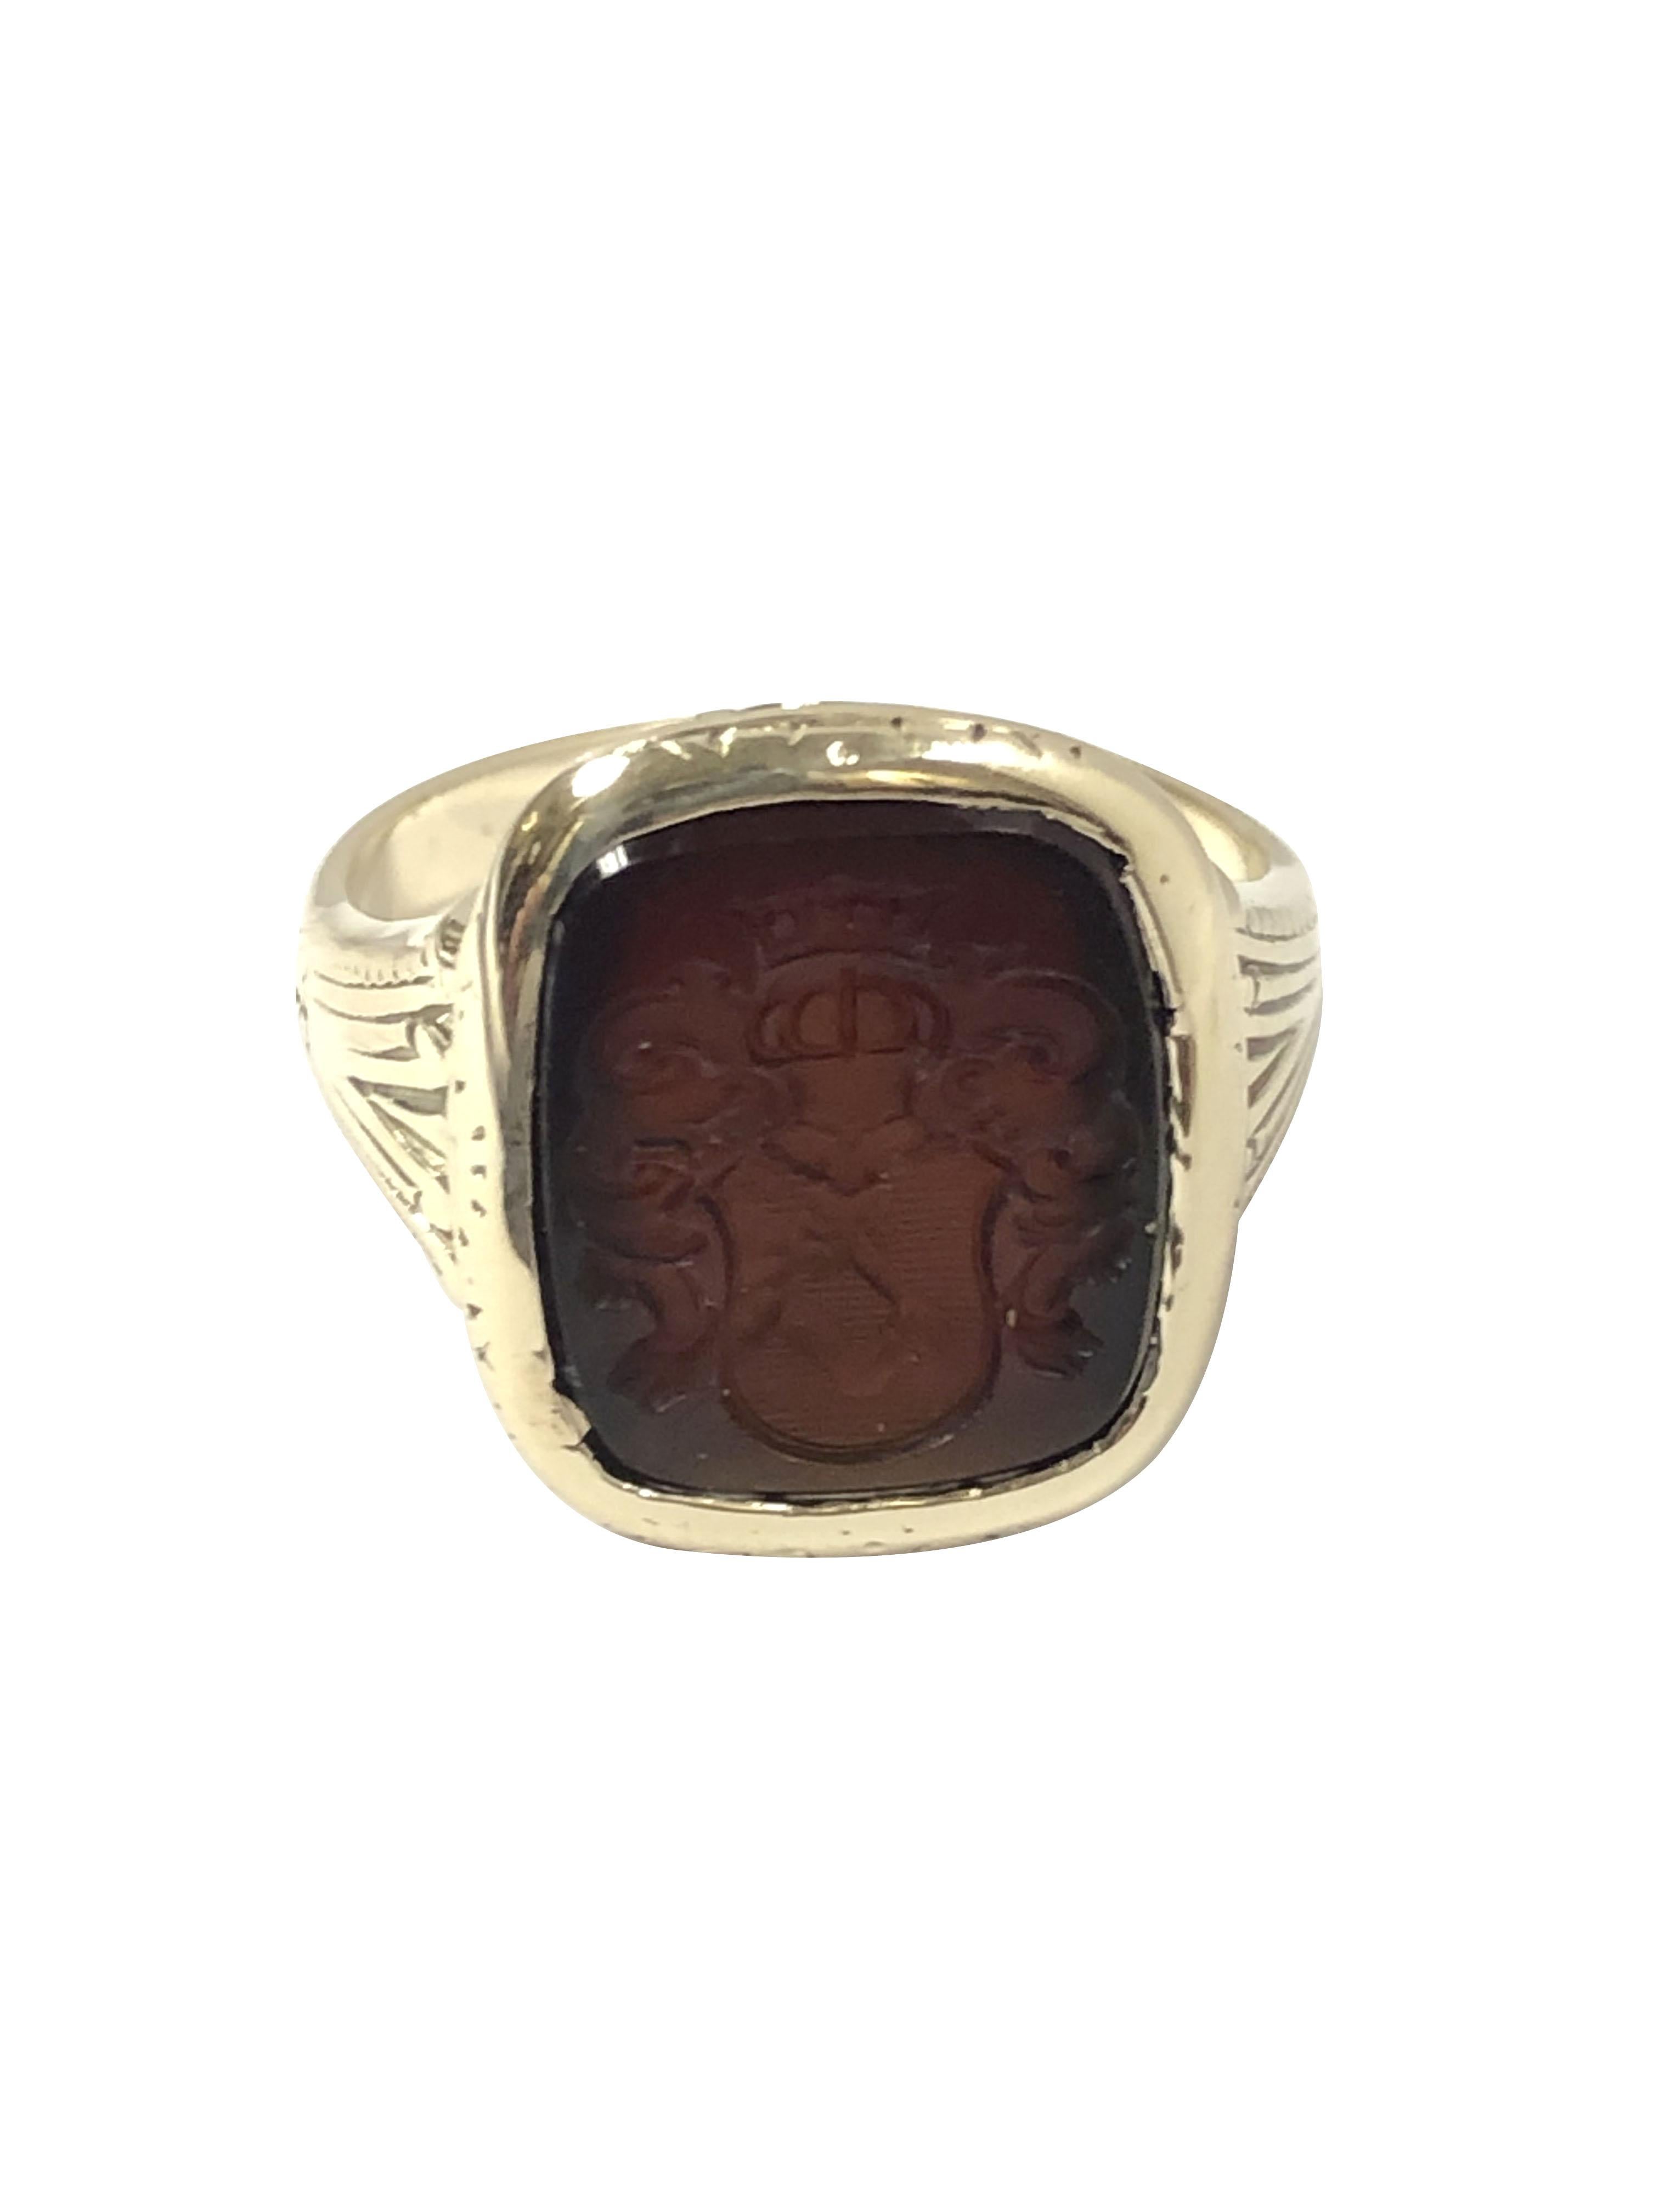 Circa 1890 - 1900 14k Yellow Gold Crest Ring, the top measuring 5/8 x 1/2 inch and is set with a deep Red / Brown Carnelian with a deep engraved Crest. the ring features hand engraving design work throughout. Finger size 7 1/4. 